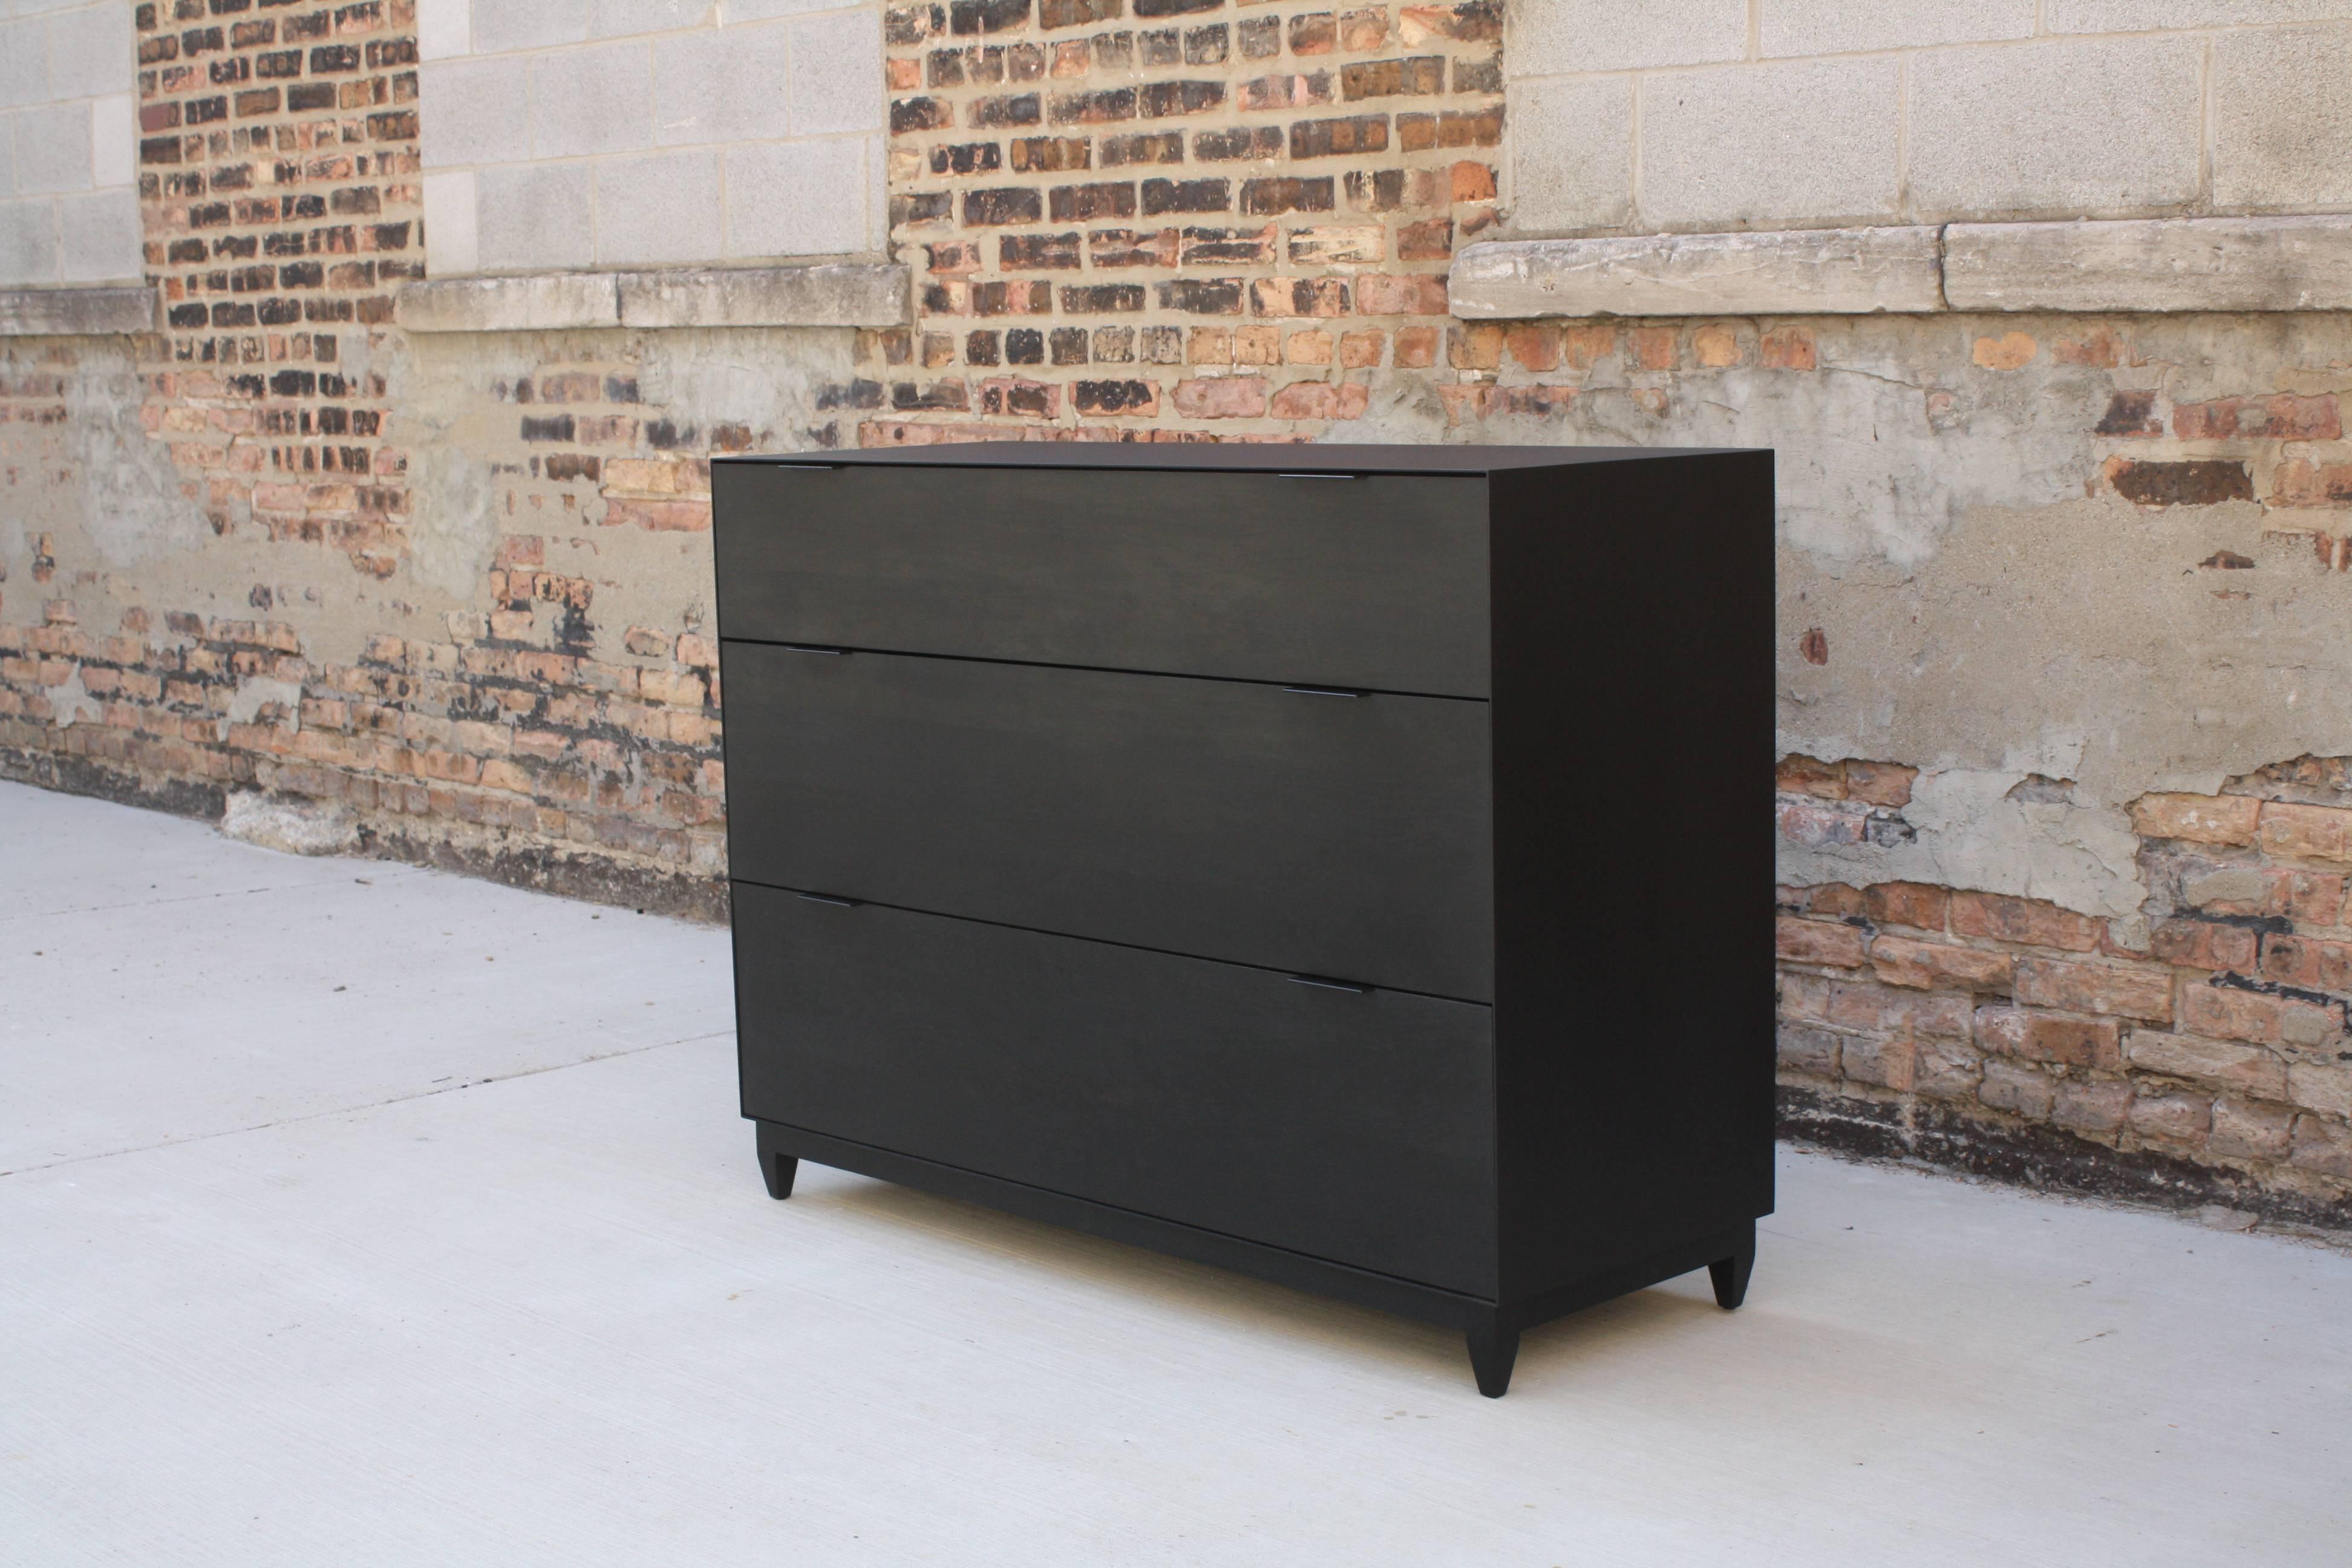 Handmade in Chicago by Laylo Studio, this contemporary cabinet is made to order in custom sizing and configuration with a choice of finishes and drawer pulls.

Pictured in a dresser configuration with three divided drawers mounted on soft close